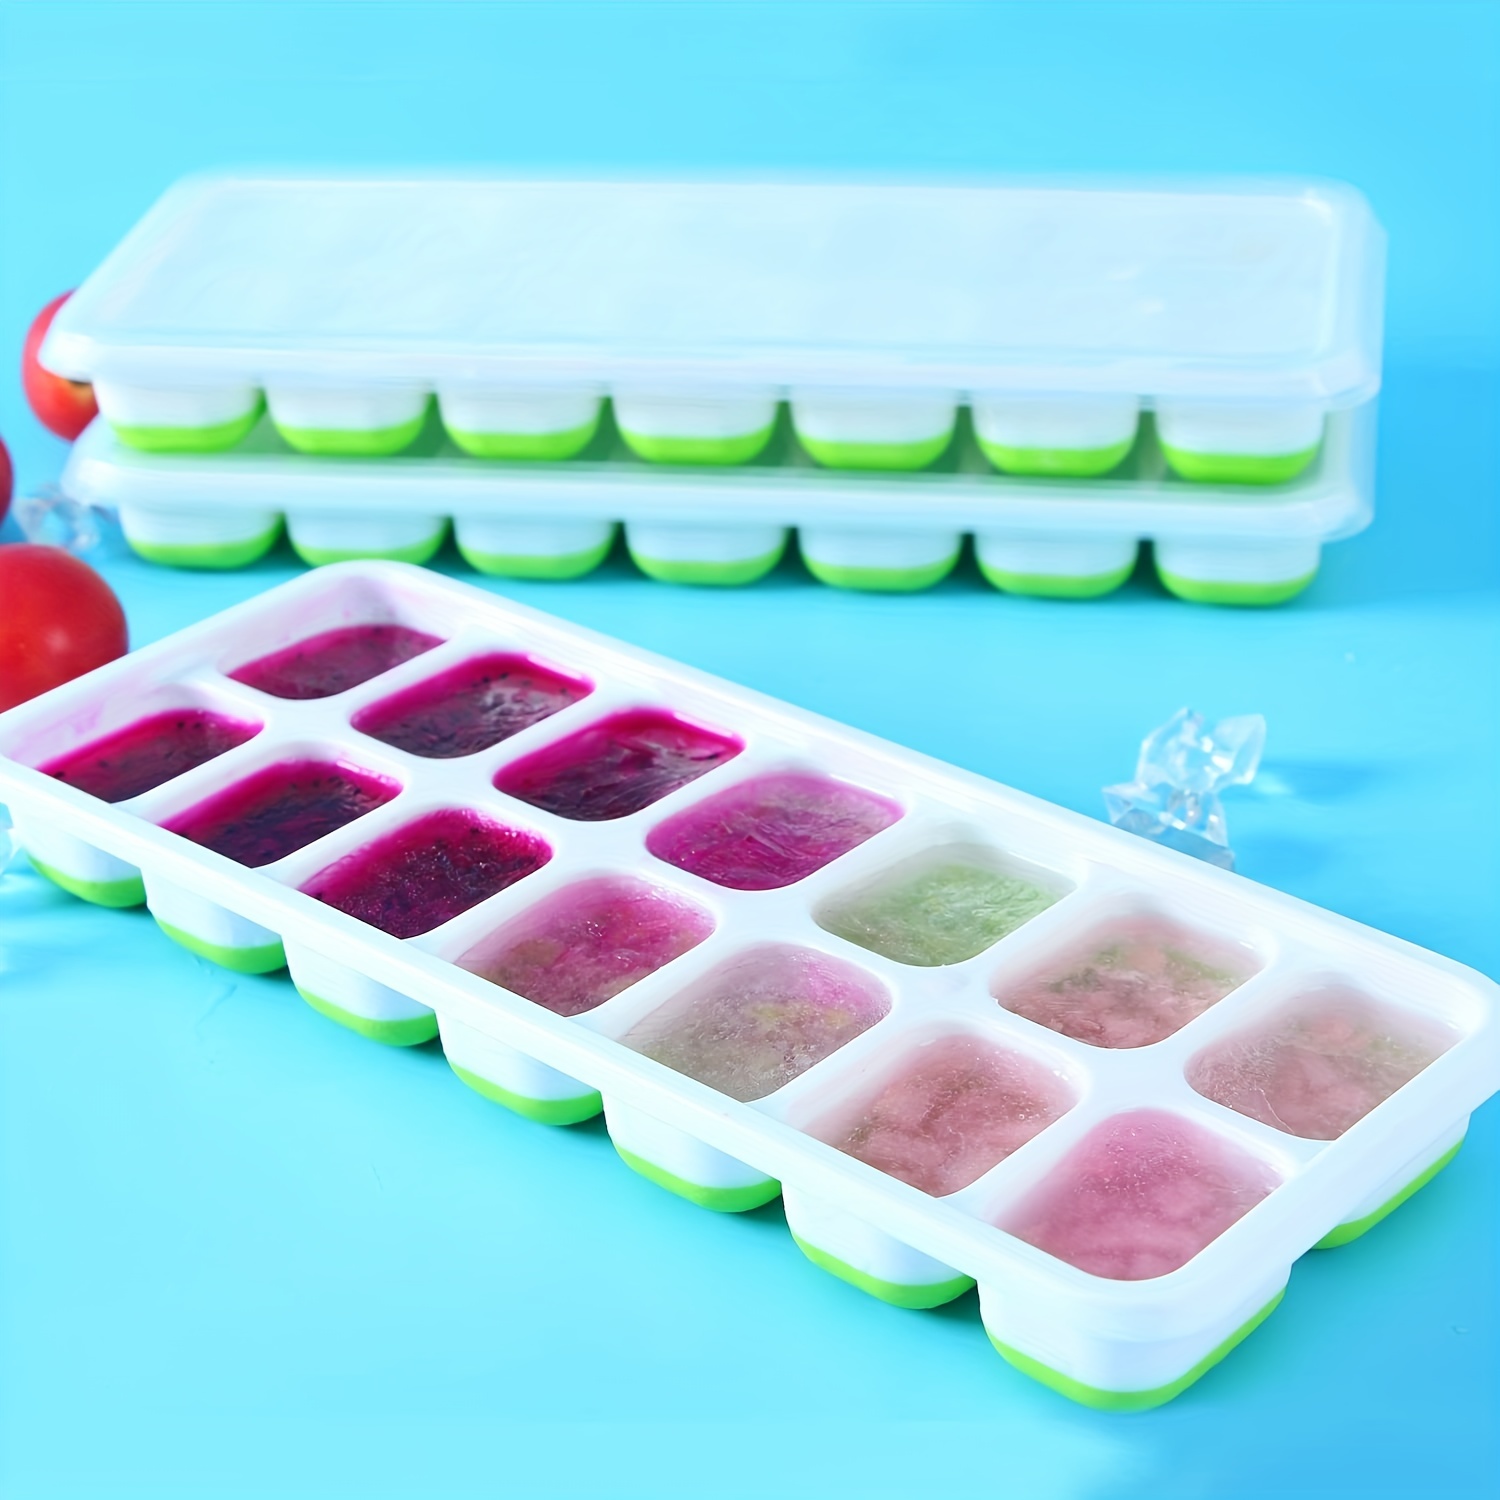 Reusable 14 Grids Silicone Ice Cube Trays with Lid Easy-Release